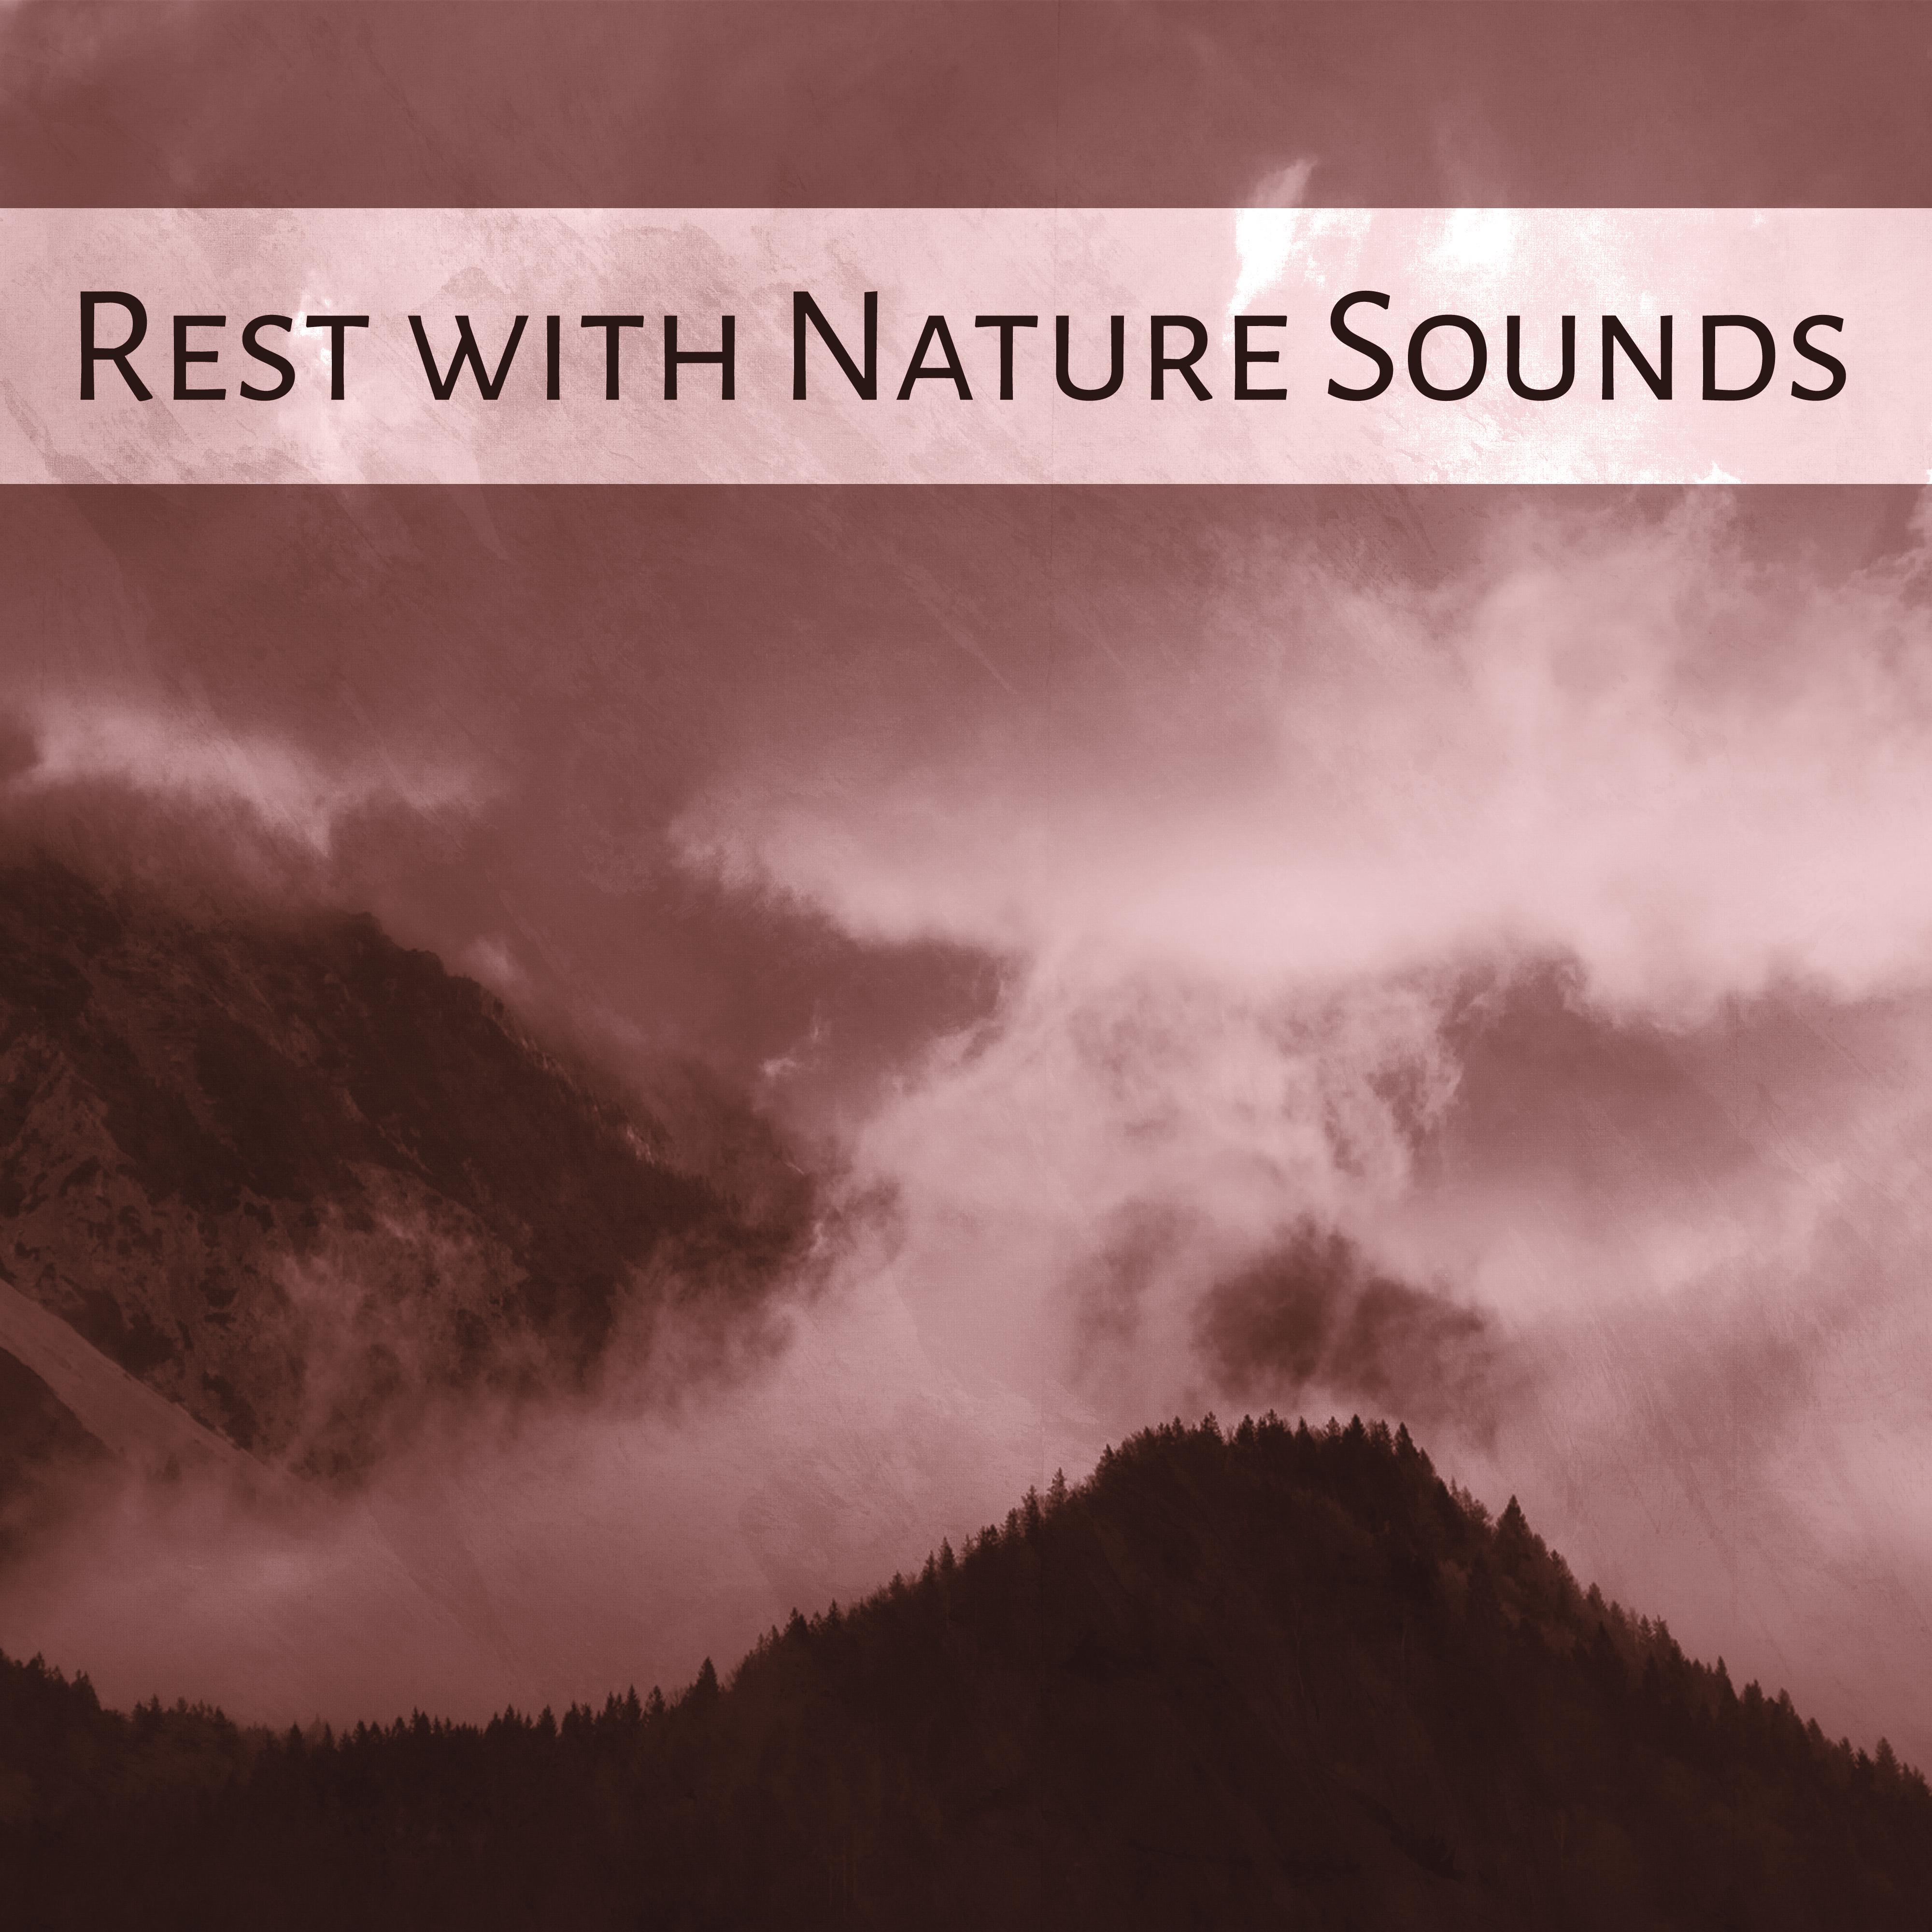 Rest with Nature Sounds – Calming Waves, Stress Relief, Relax Yourself, New Age Sounds, Harmony, Peaceful Mind